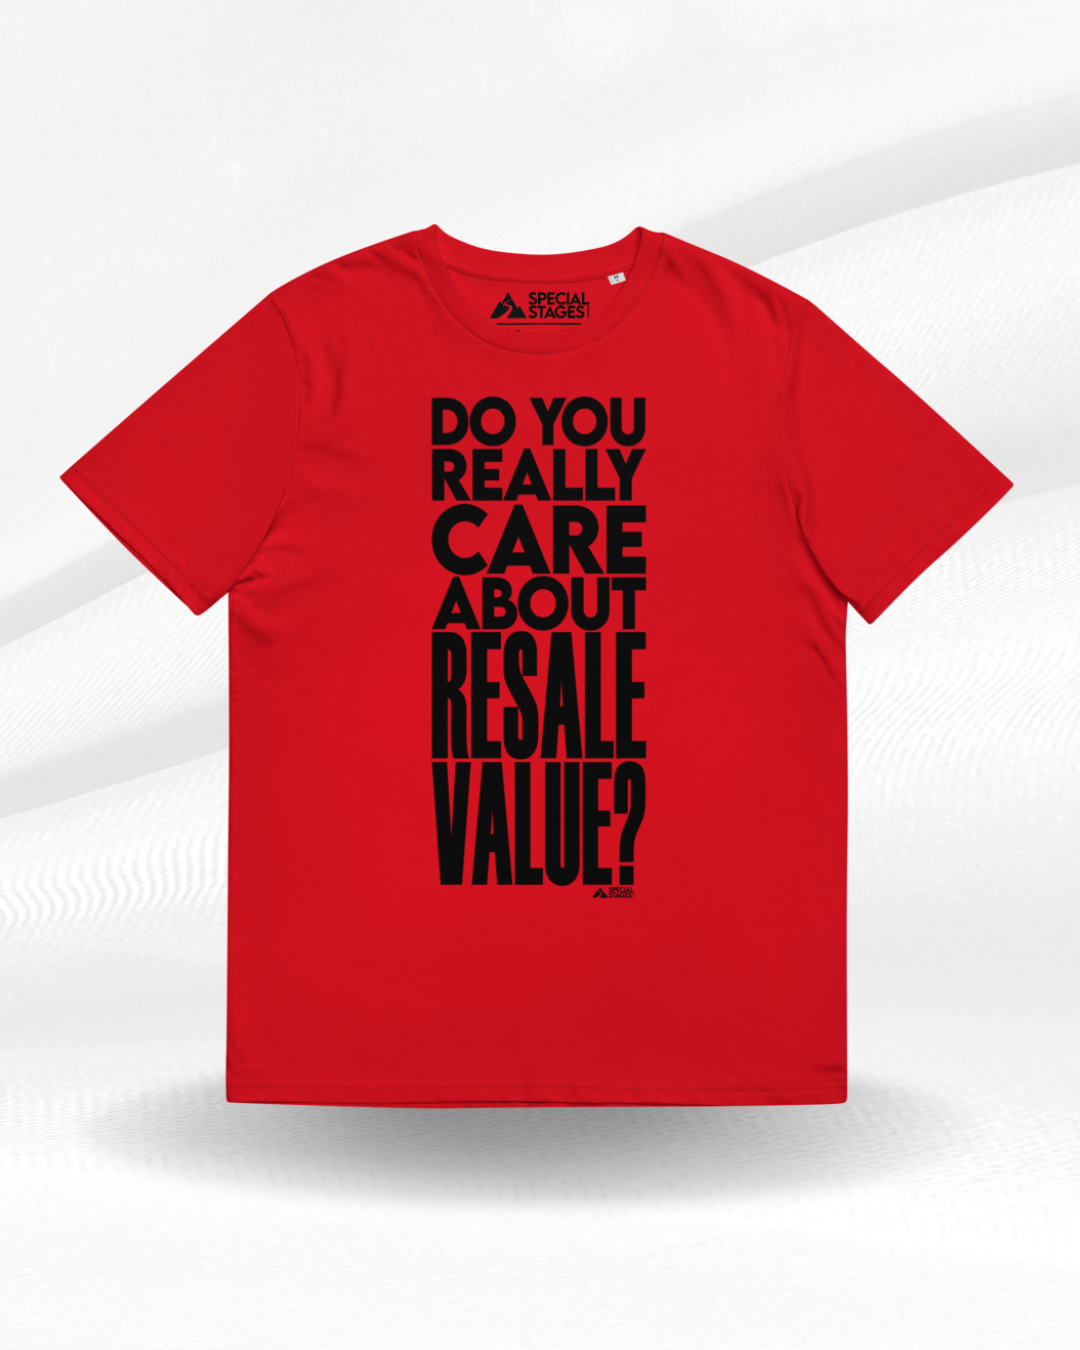 Red Resale Value T-Shirt